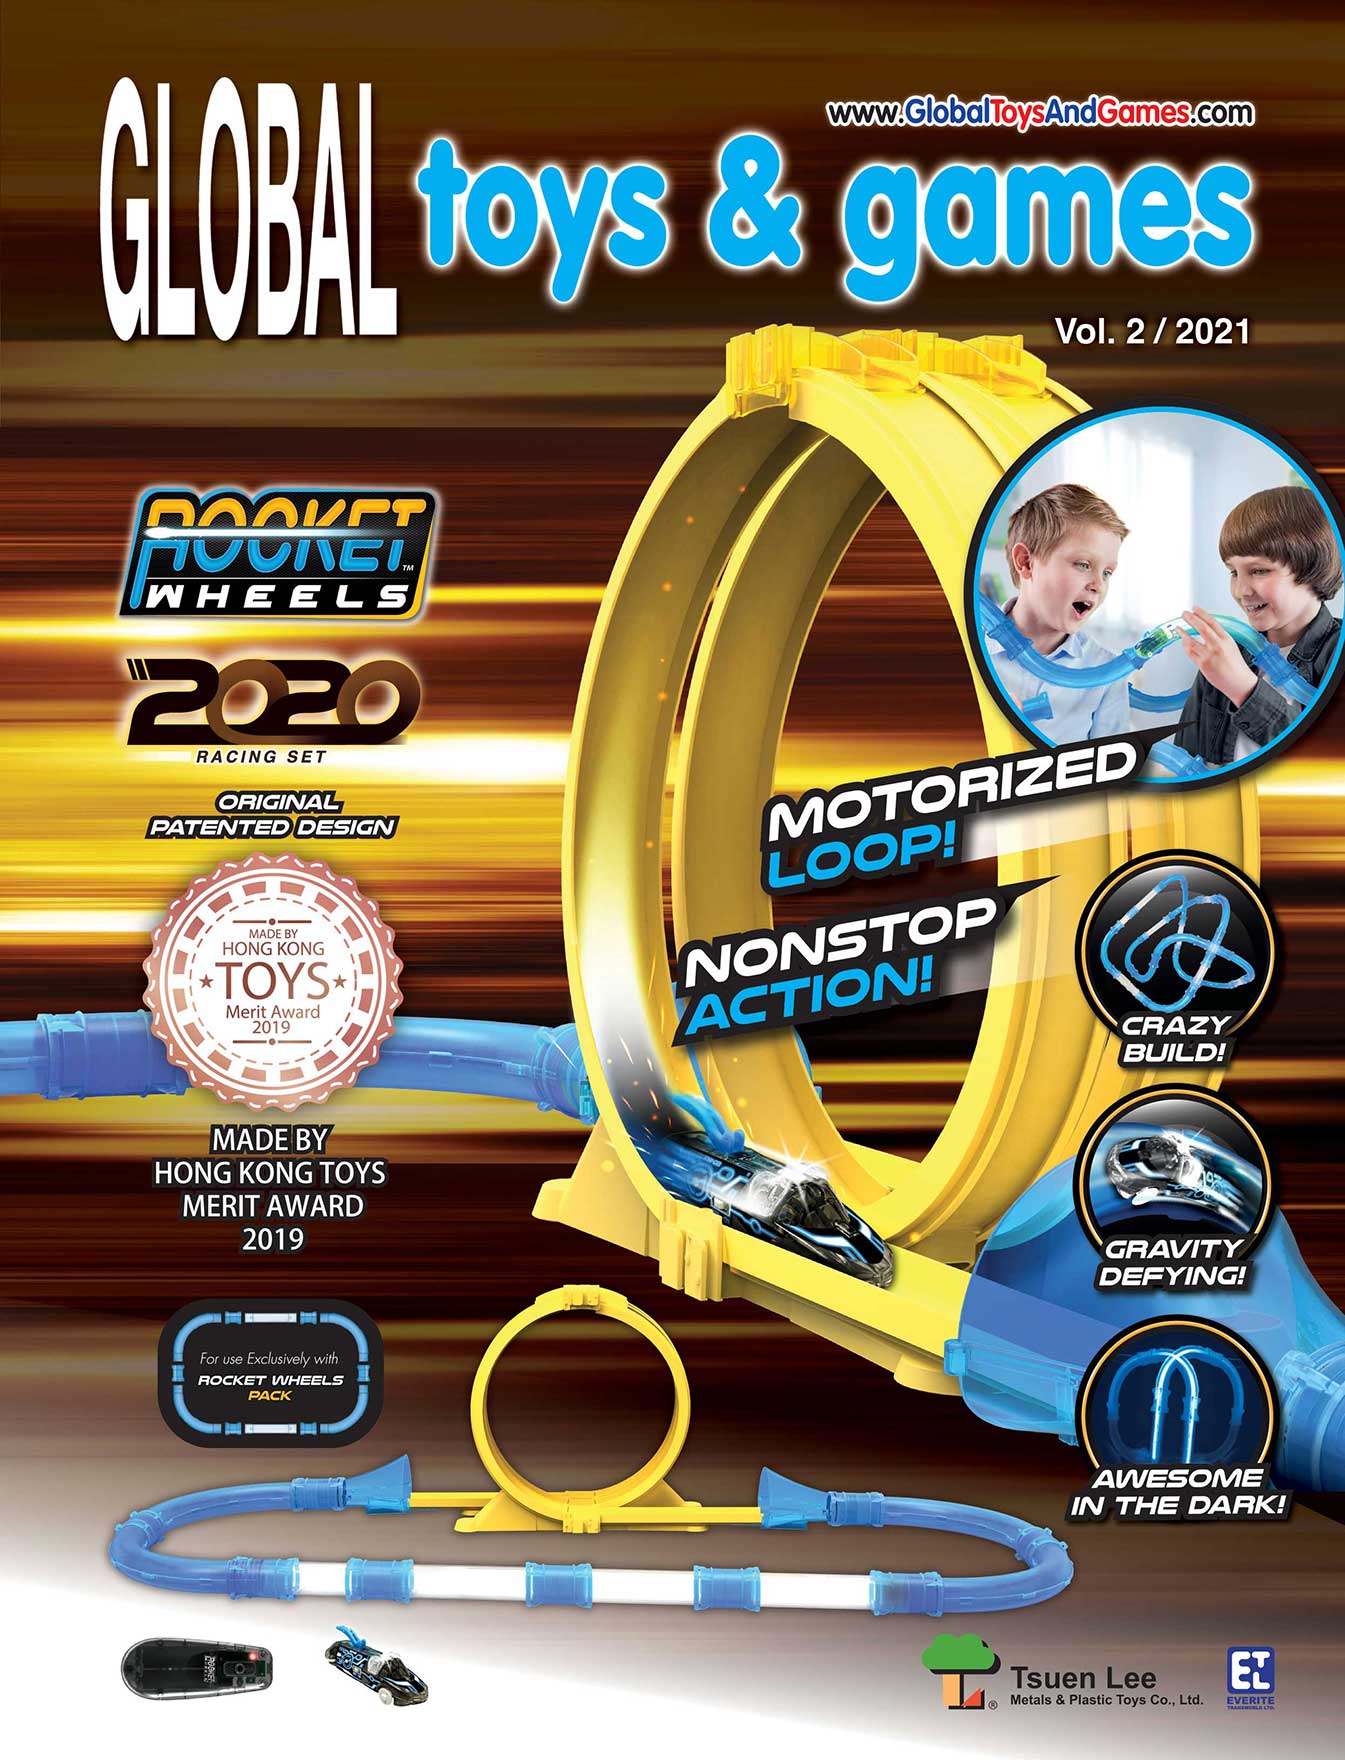 Global Toys & Games